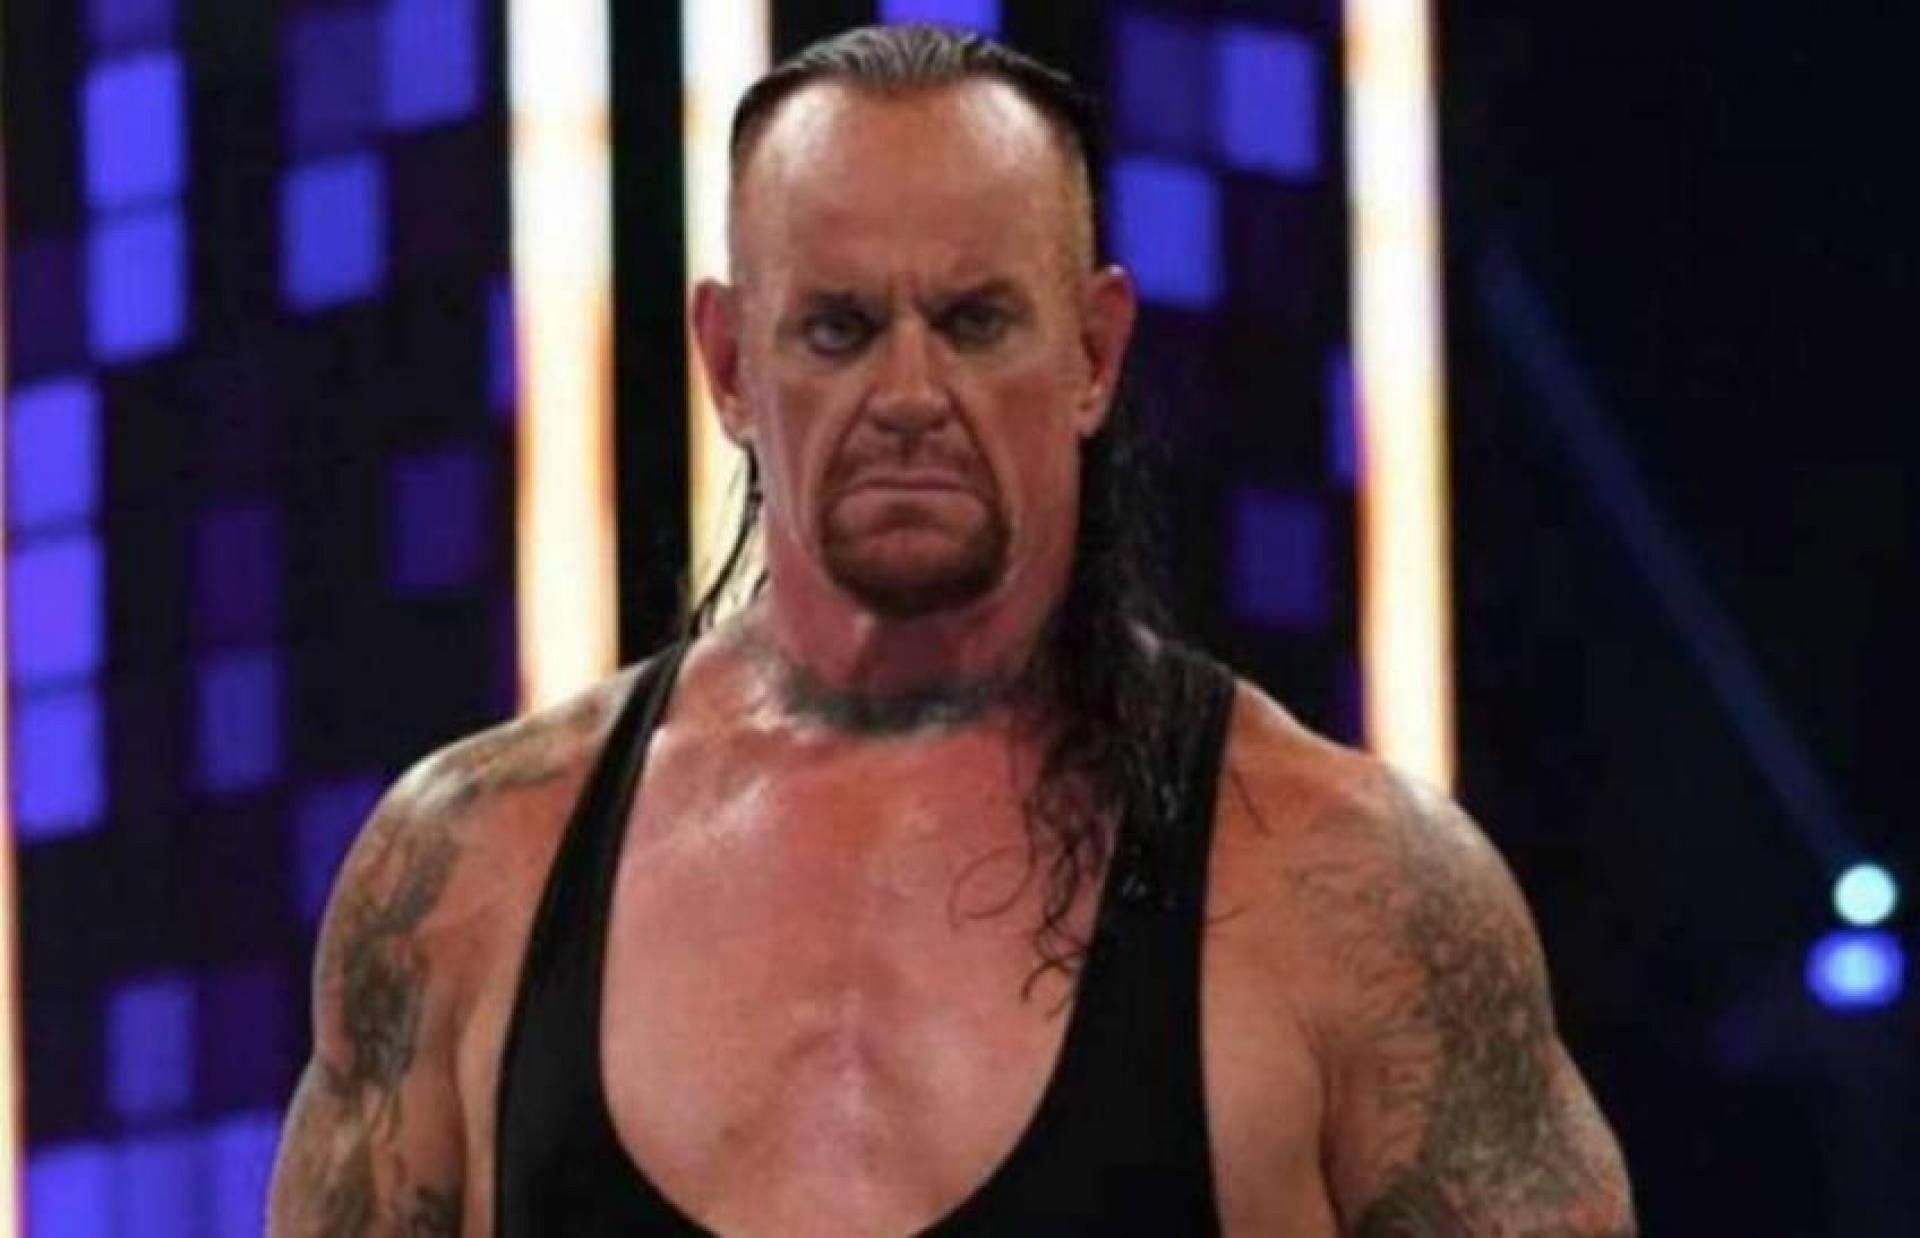 The Undertaker will be inducted into WWE Hall of Fame this year!